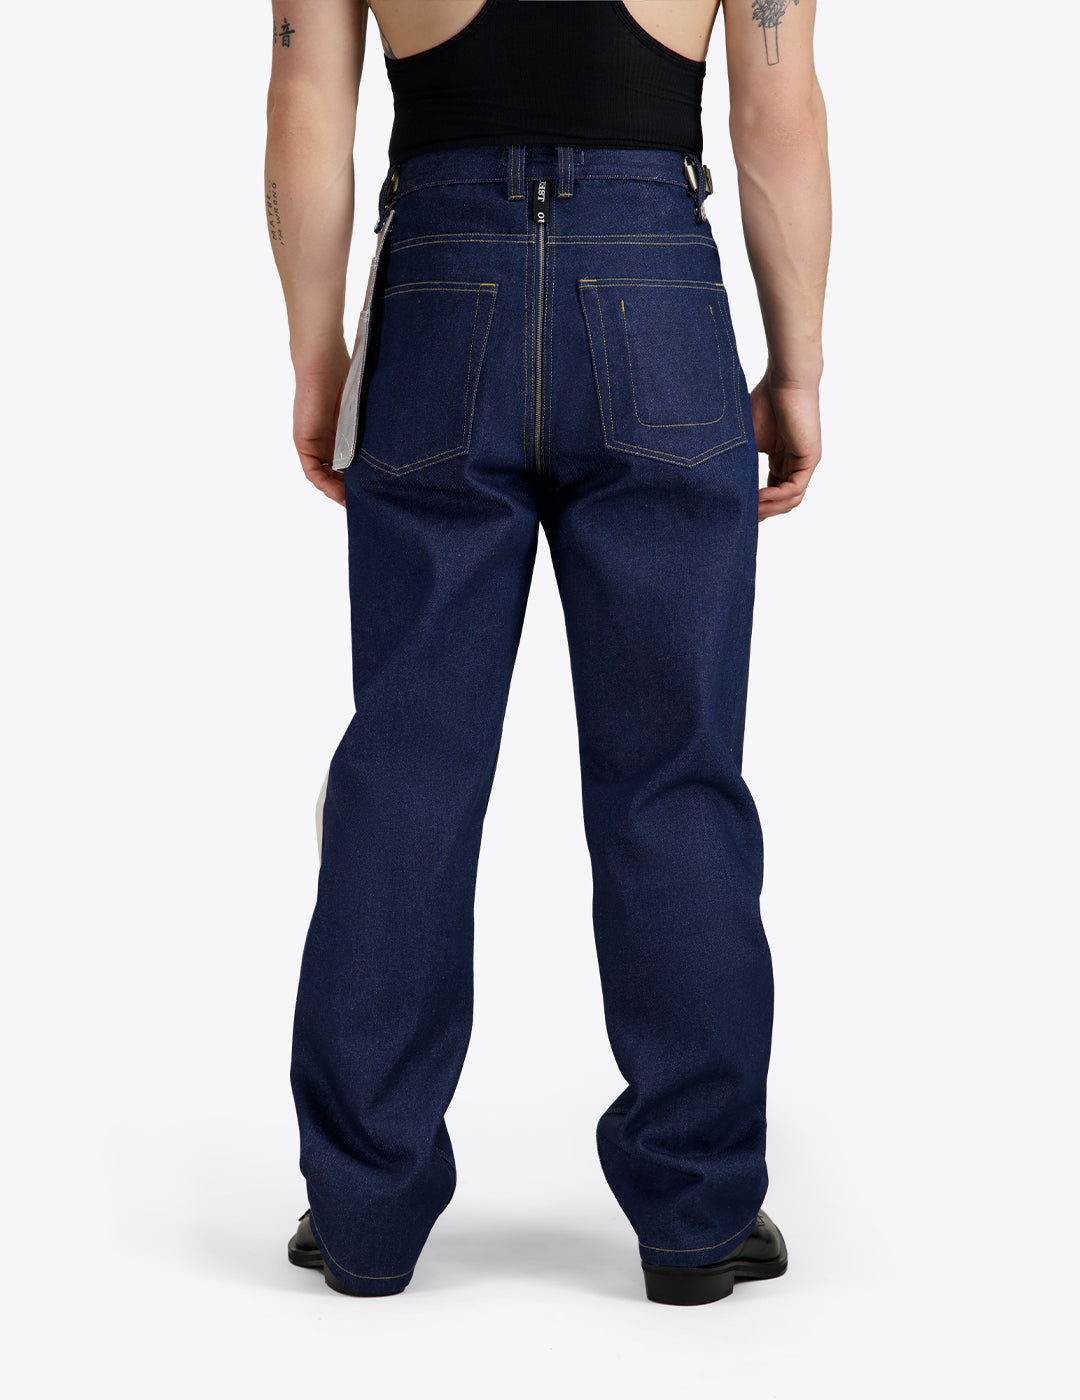 THE WORKER JEANS IN INDIGO RECYCLED DENIM